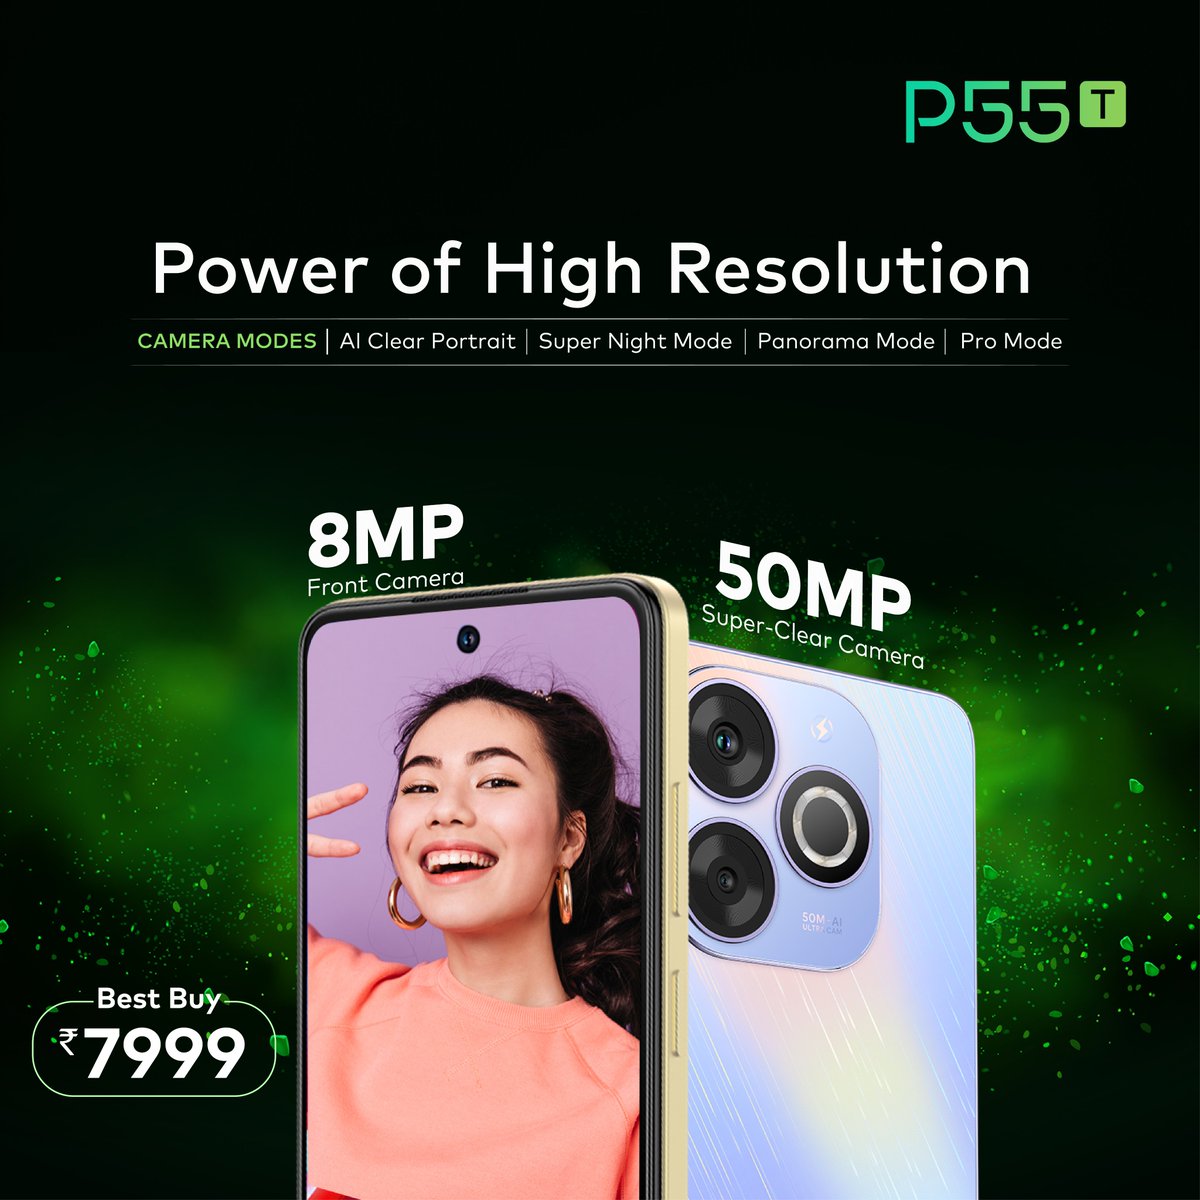 Anyone can be a pro photographer with the 50MP super-clear rear camera and 8MP front camera of itelP55T. Available at your nearest retail outlet for just Rs 7999. #enjoybetterlife #P55T #itelSmartphone